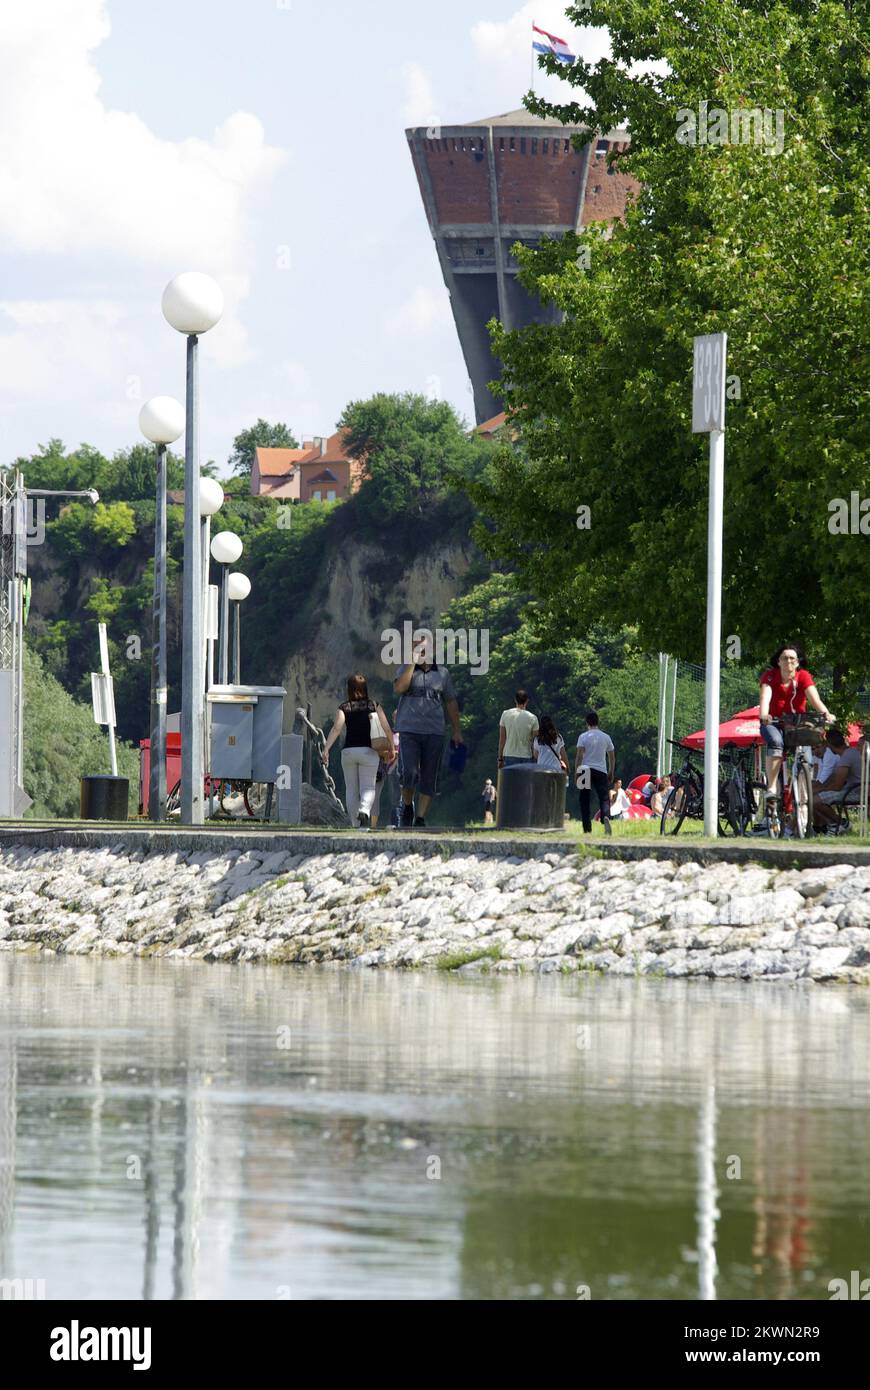 14.06.2013: Vukovar - Water wave that caused massive flooding in Europe came to Vukovar, but well prepared embankments resist the Danube, which is constantly growing. Residents of carefree spending time strolling the sunny city of not allowing the Danube that they spoil the day. Photo: Marko Pavlovic / HaloPix / PIXSELL Stock Photo